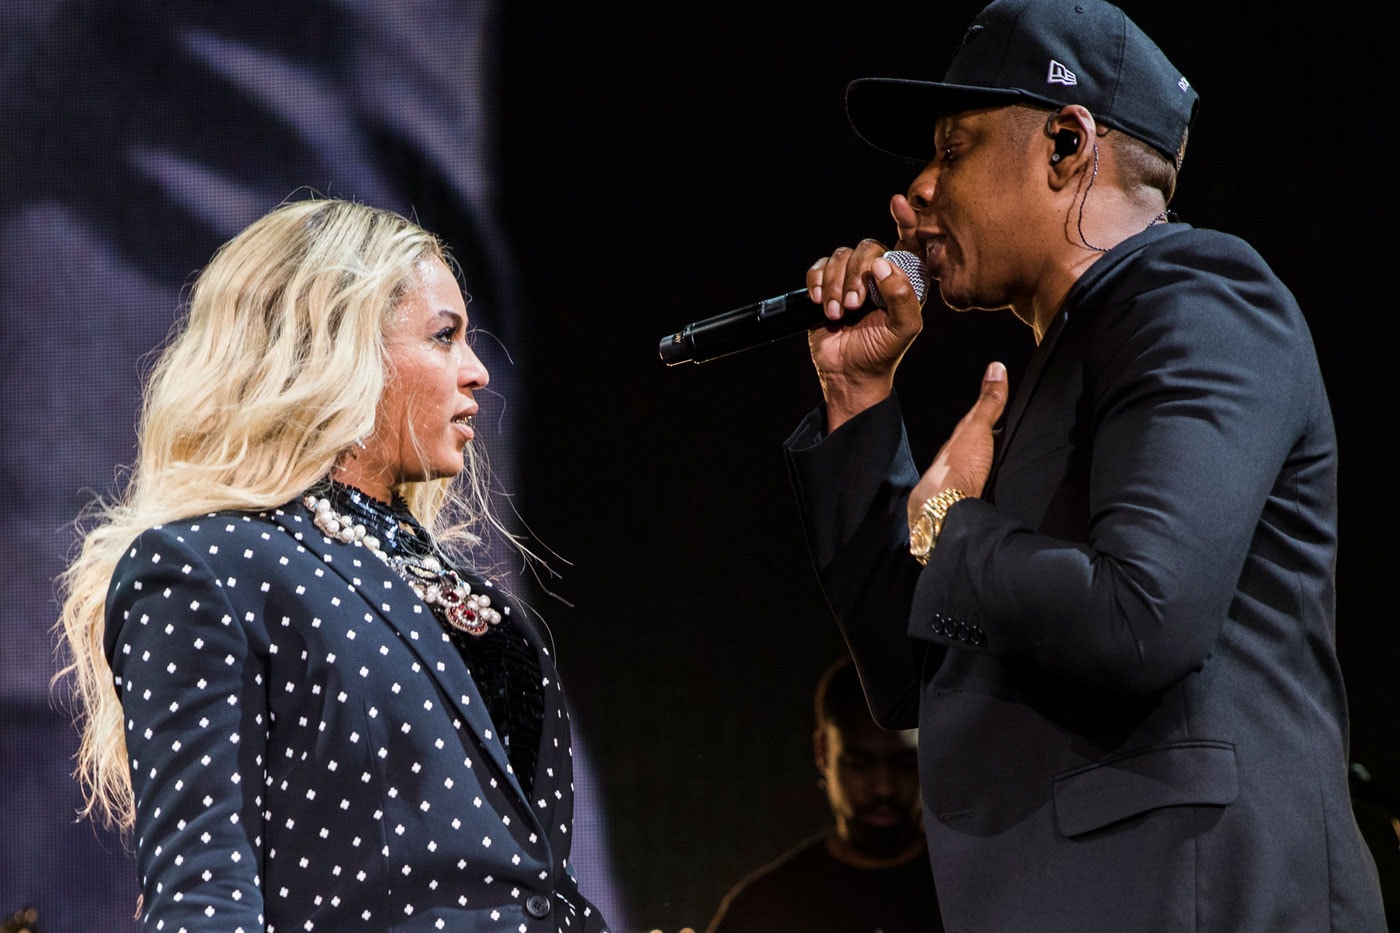 Jay Z & Beyonce Perform Together for 'Formation' Tour Stop